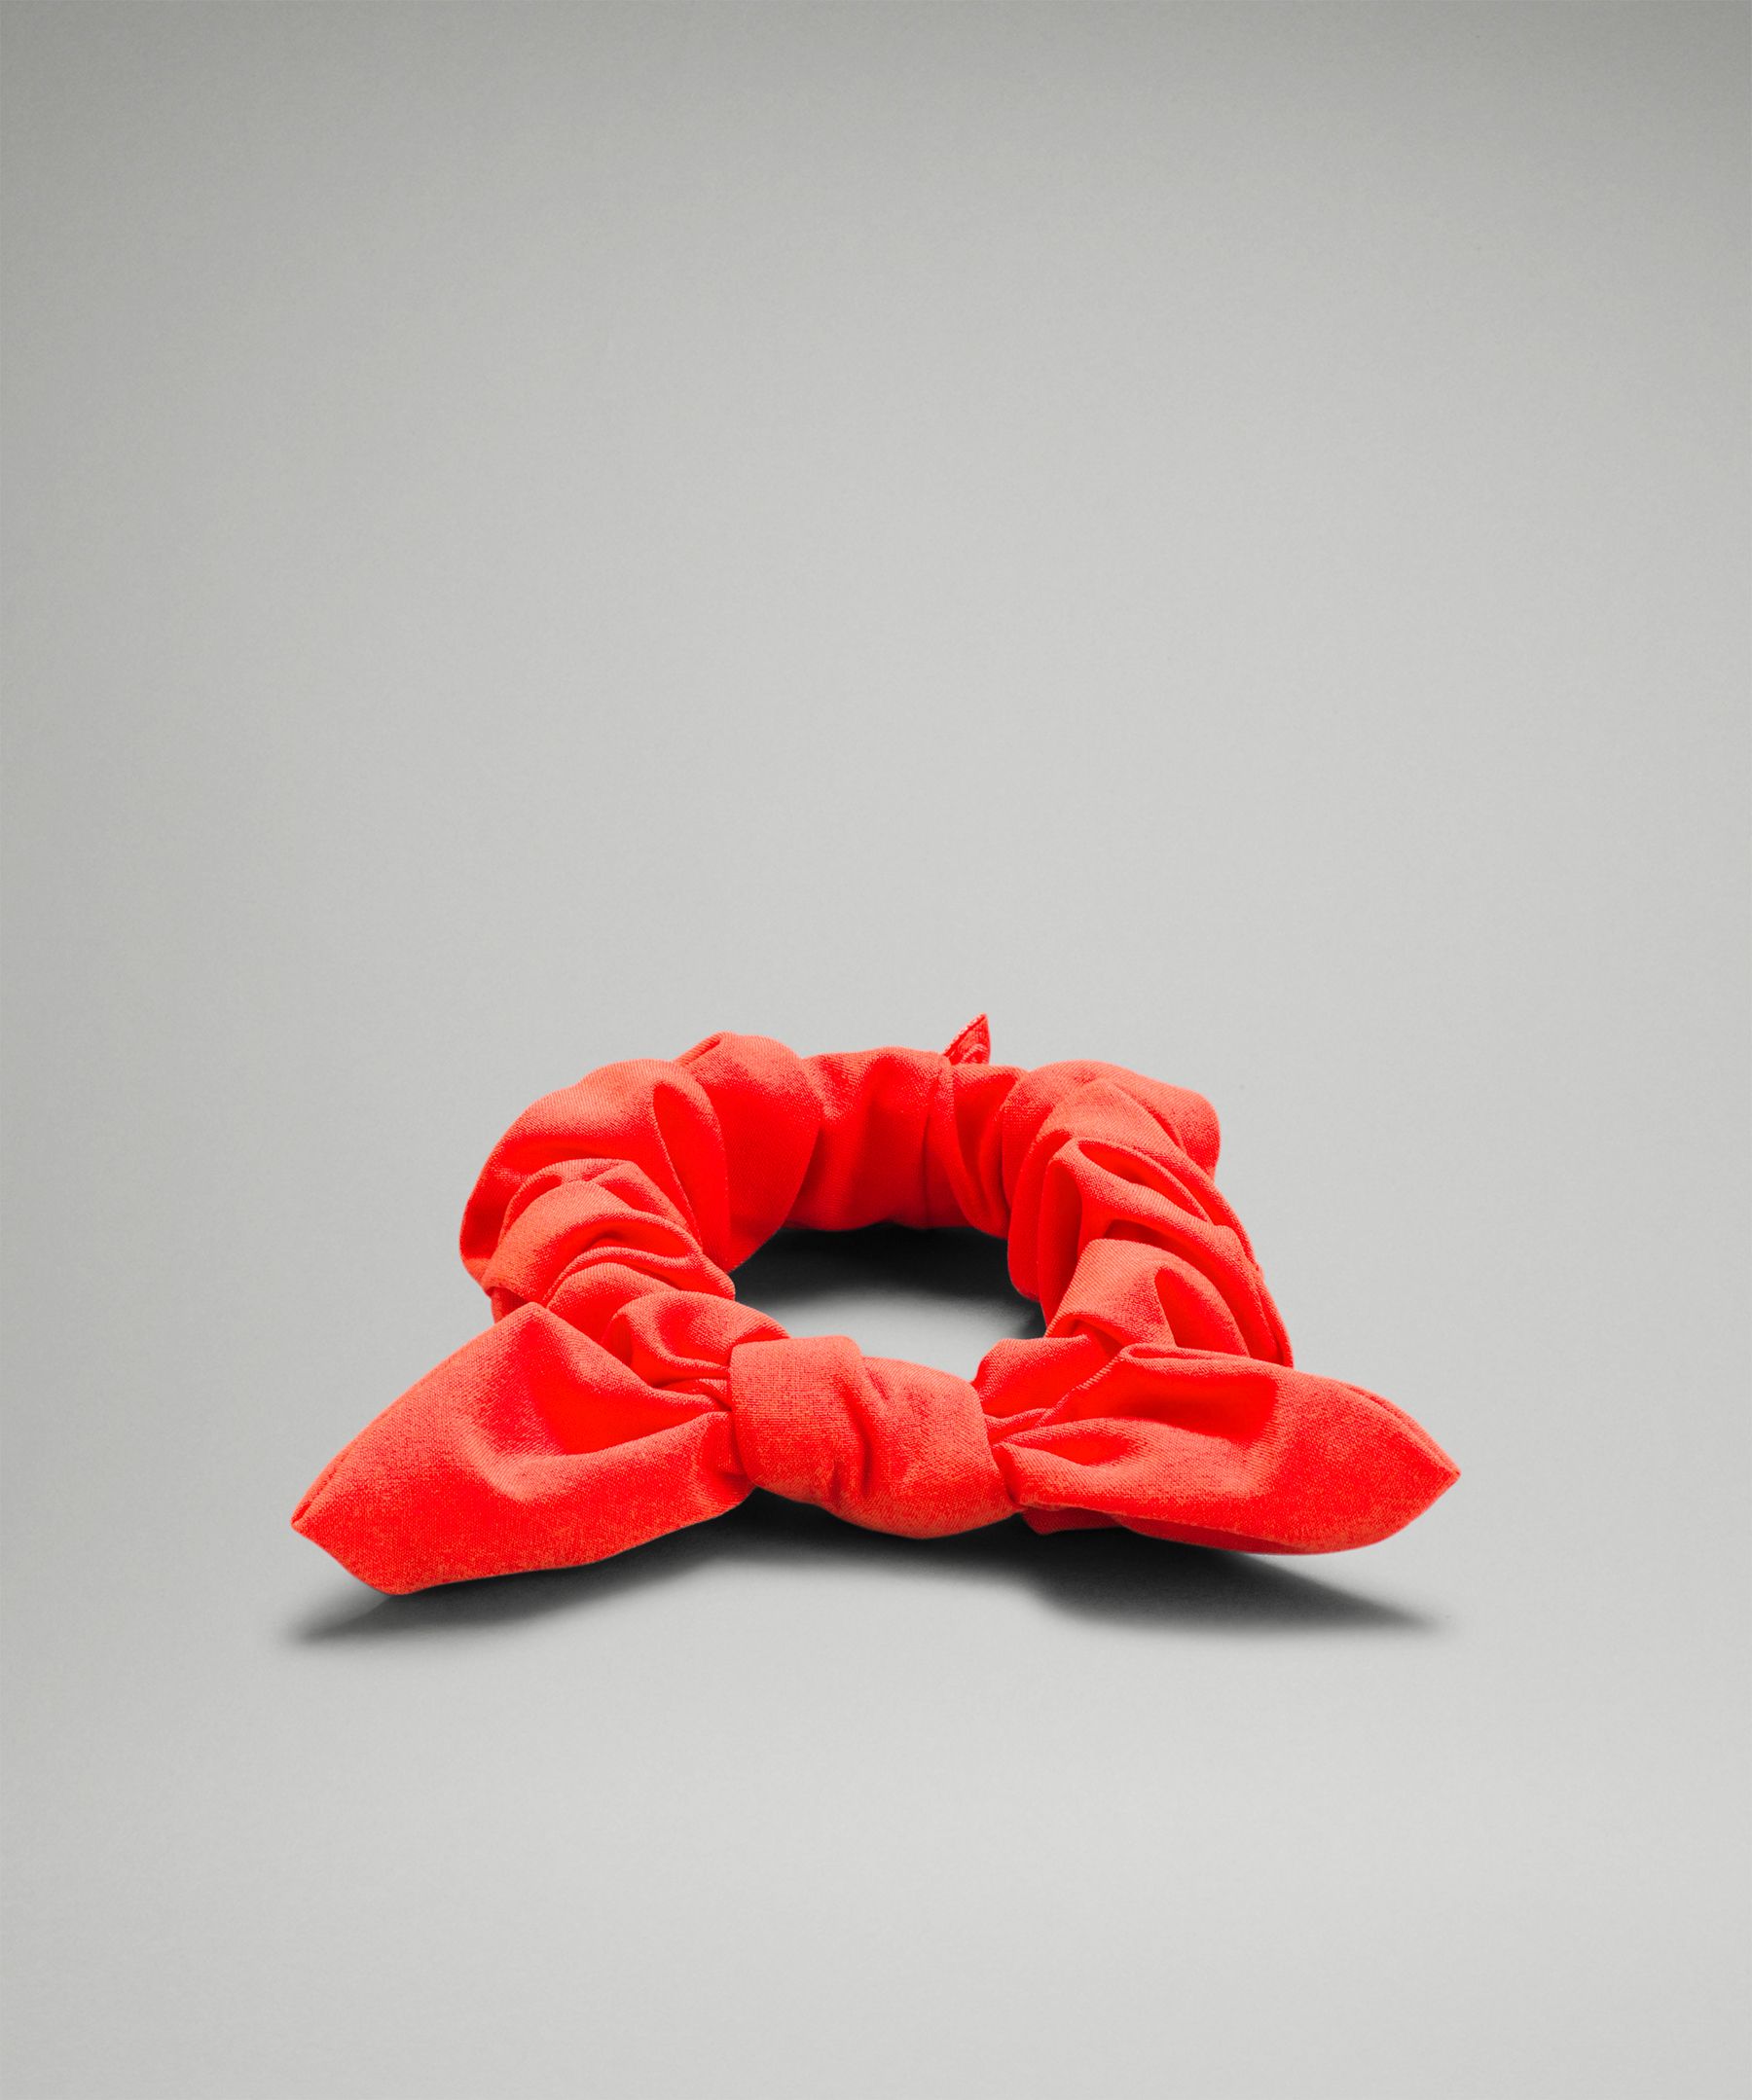 Lululemon Uplifting Bow Scrunchie In Autumn Red